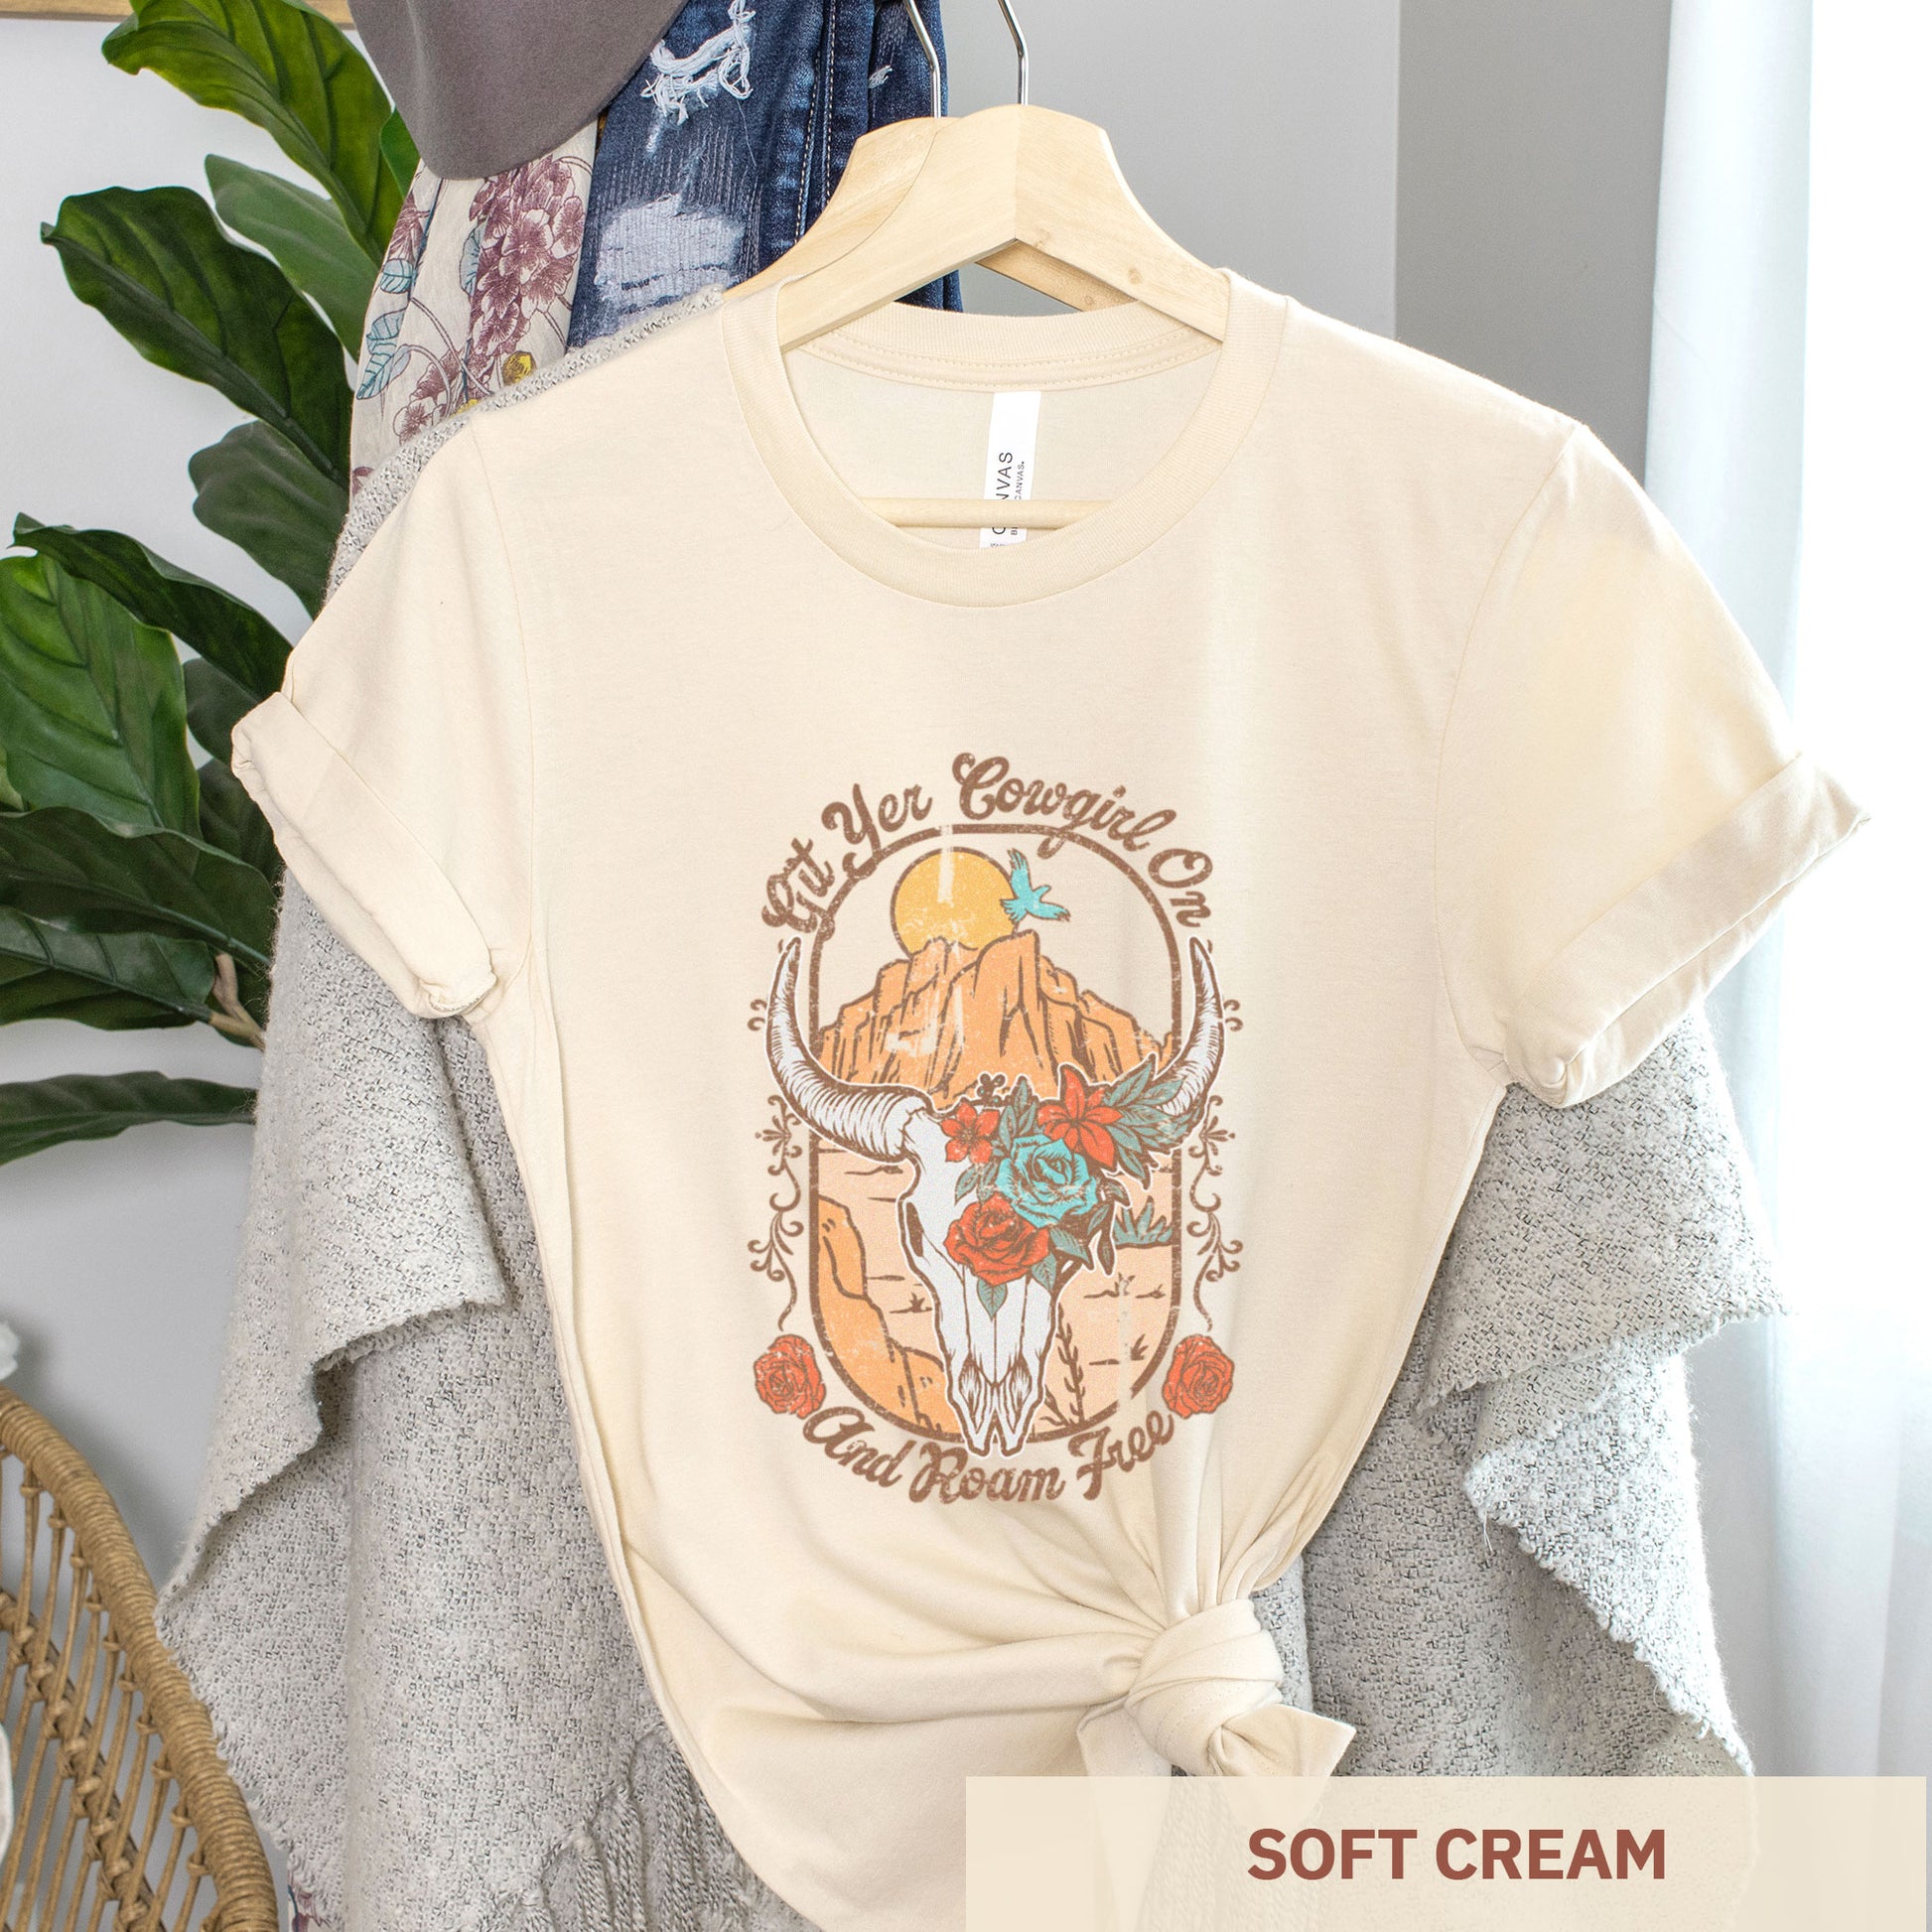 A hanging soft cream peach Bella Canvas t-shirt featuring a cow skull that says git yer cowgirl on.